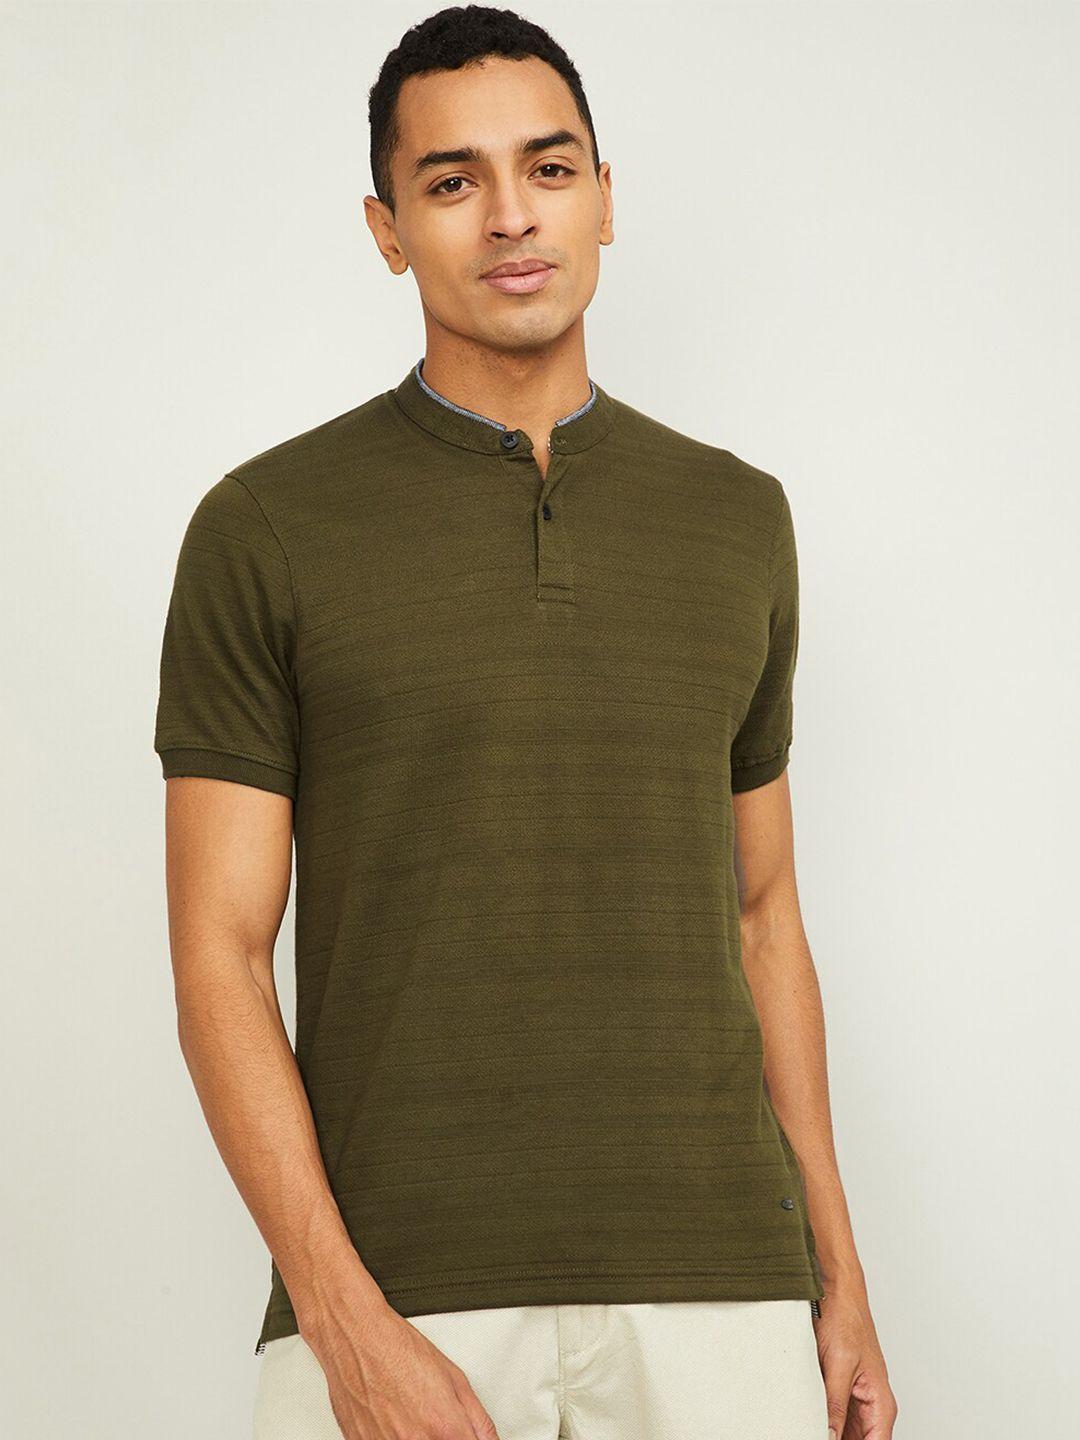 code by lifestyle men olive green henley neck cotton t-shirt